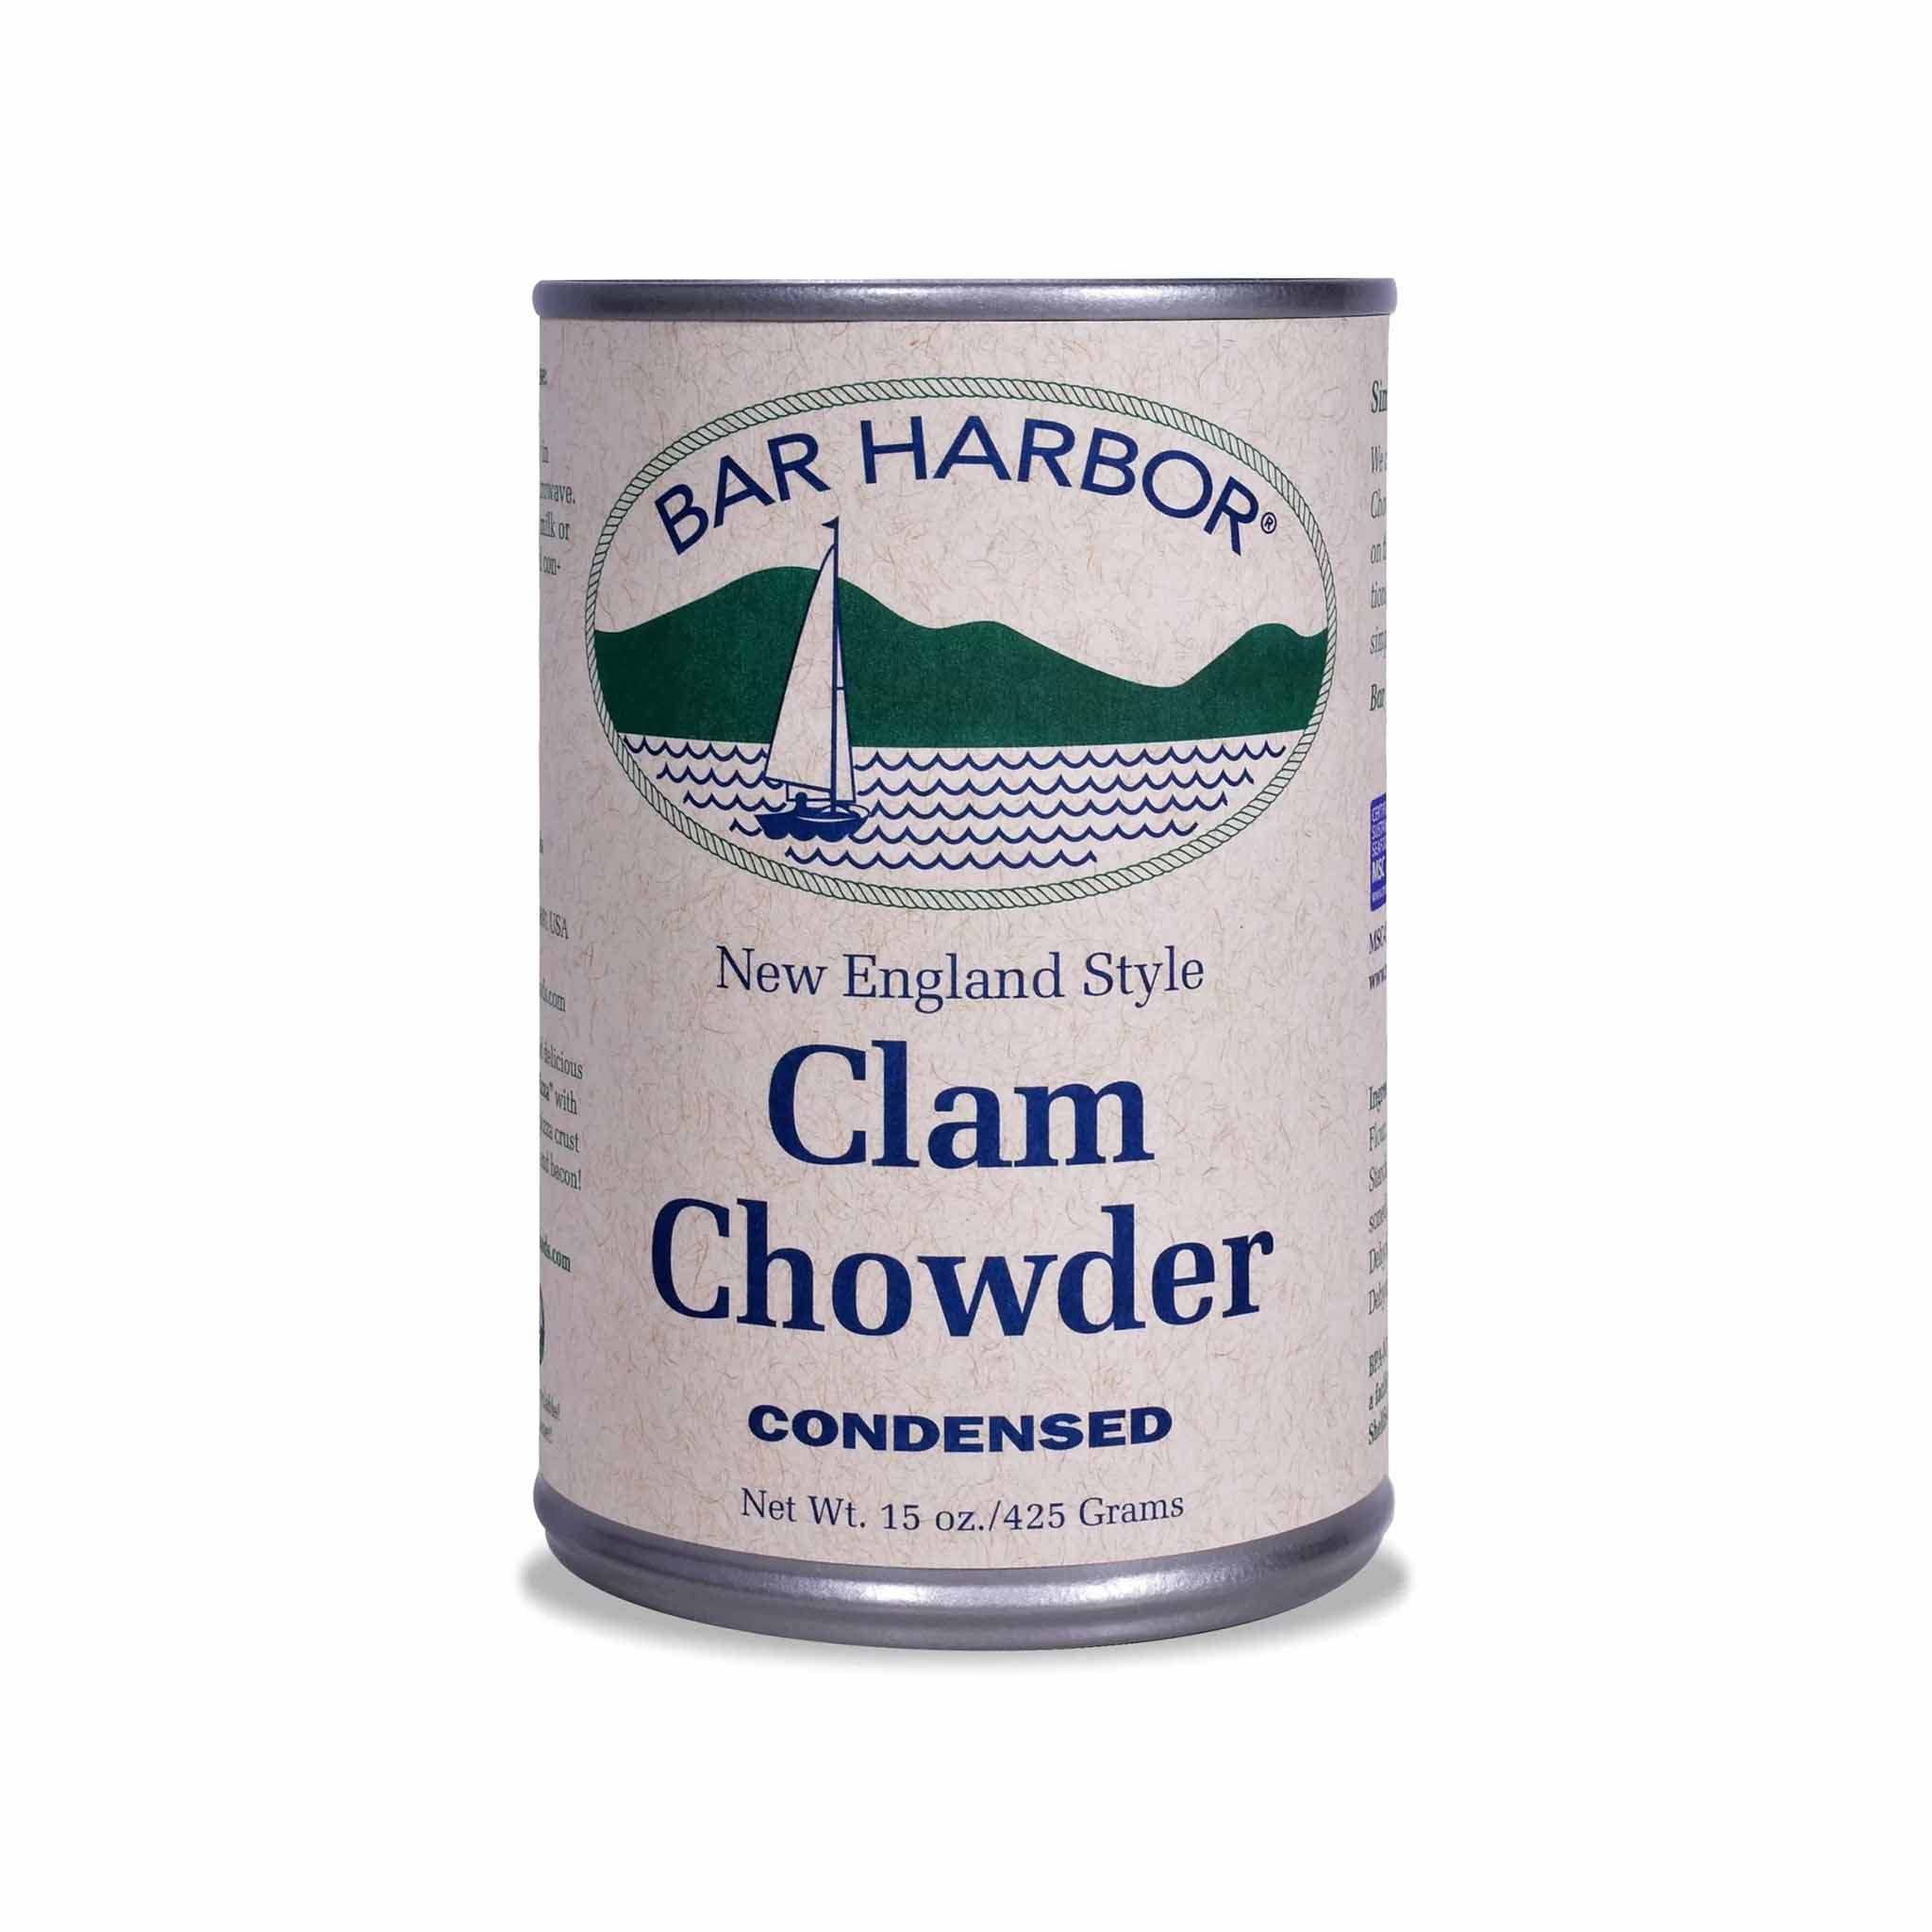 Bar Harbor Clam Chowder New England Style in a Can